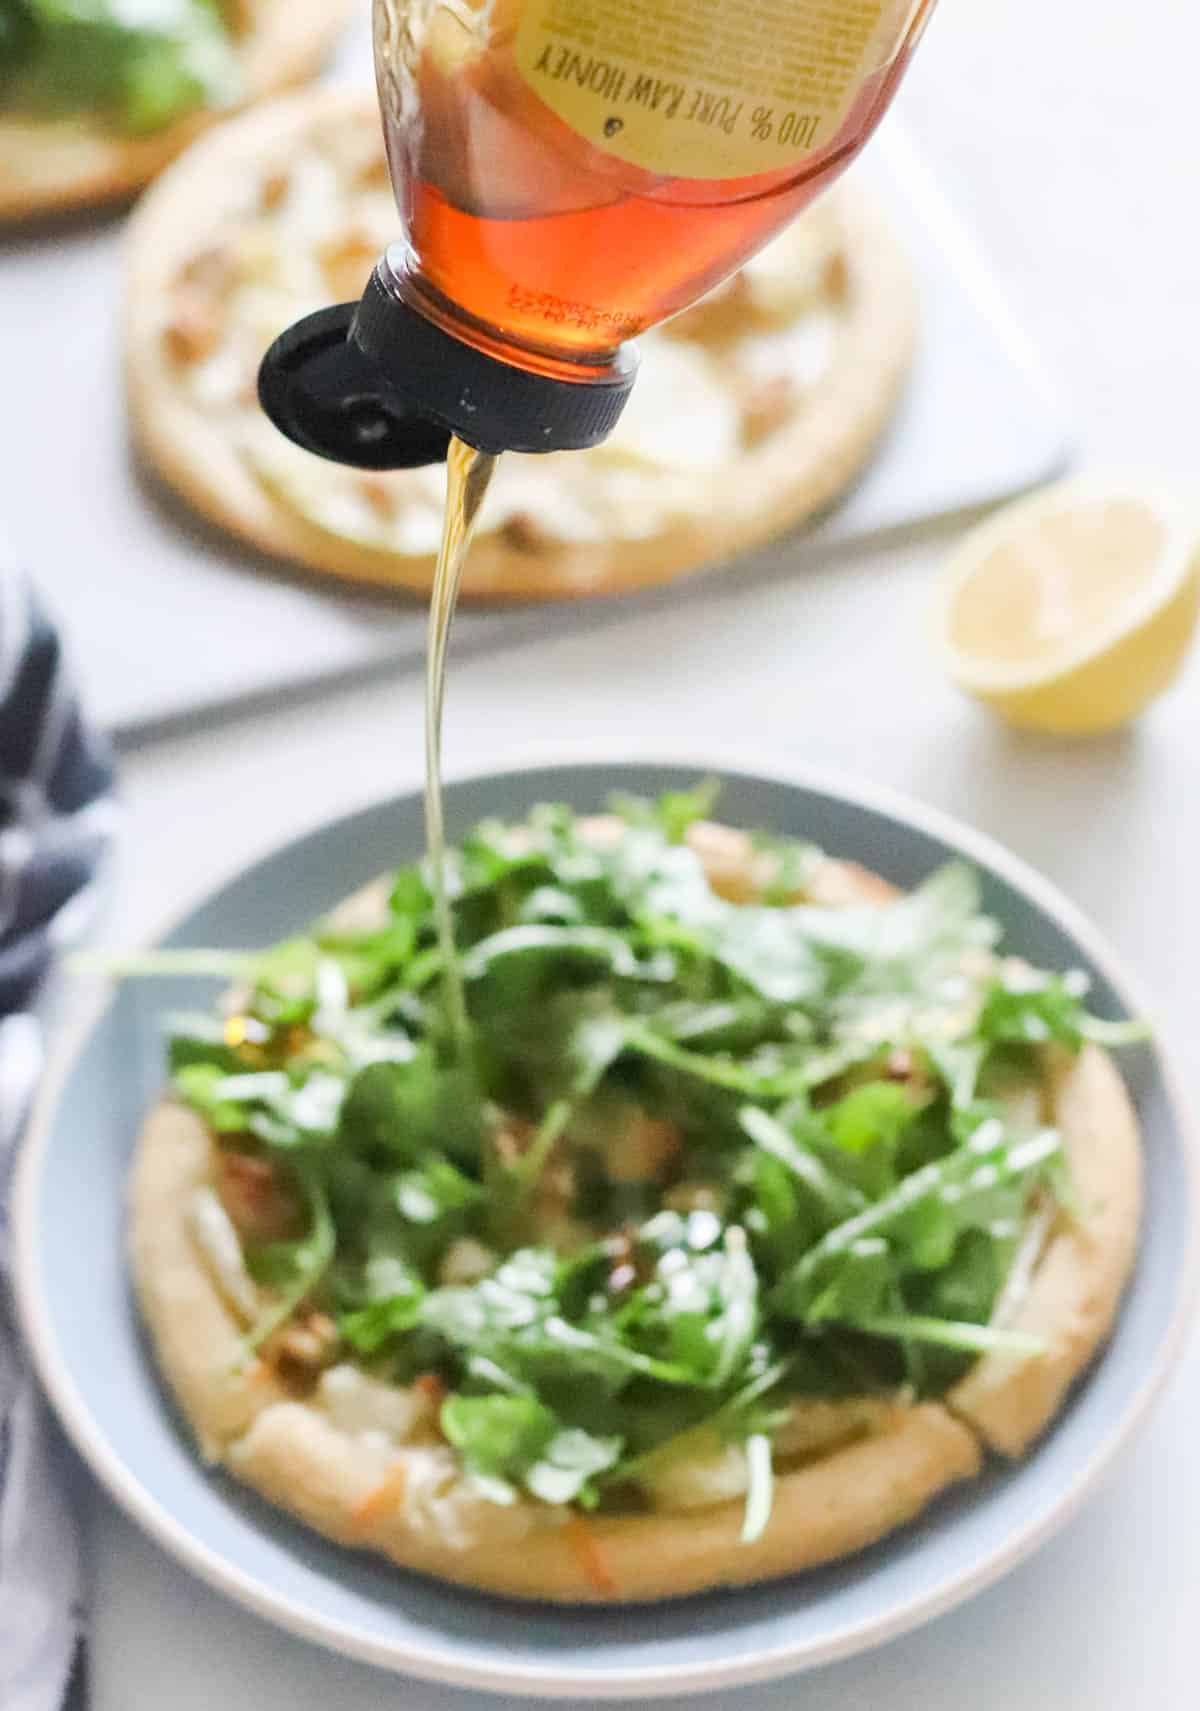 honey being squeezed onto a personal pizza topped with arugula on a blue plate with a pizza and a cut lemon in background